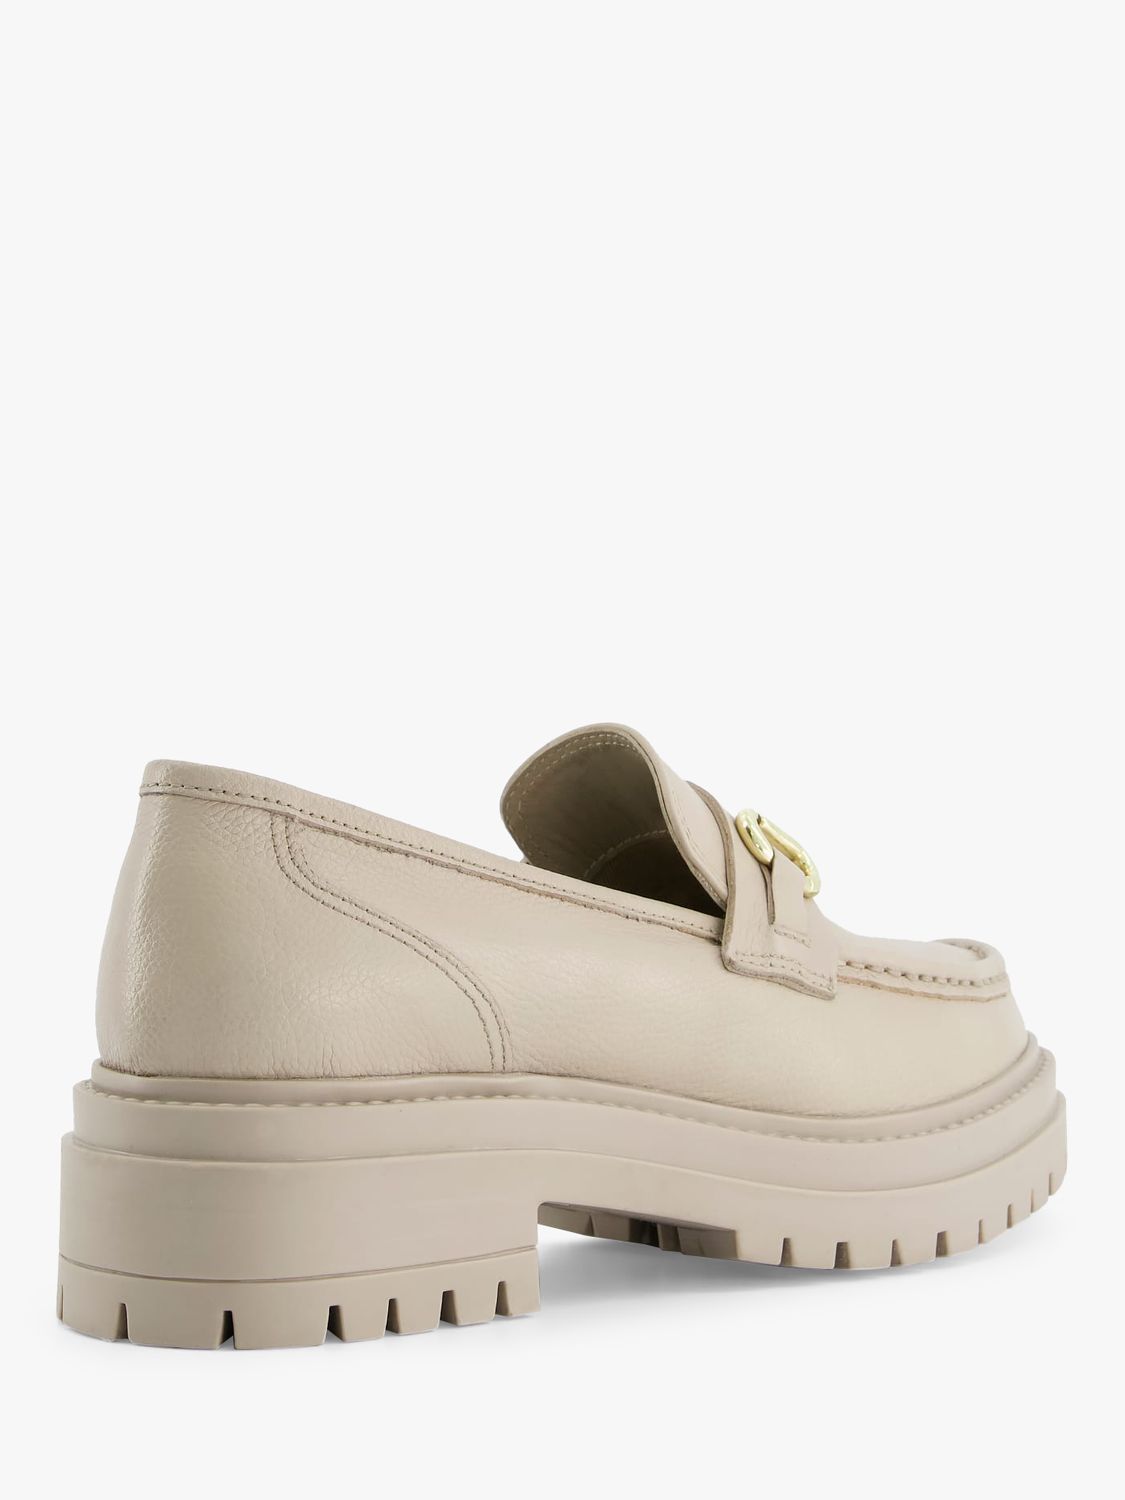 Dune Gallagher Flatform Leather Loafers, Cream at John Lewis & Partners